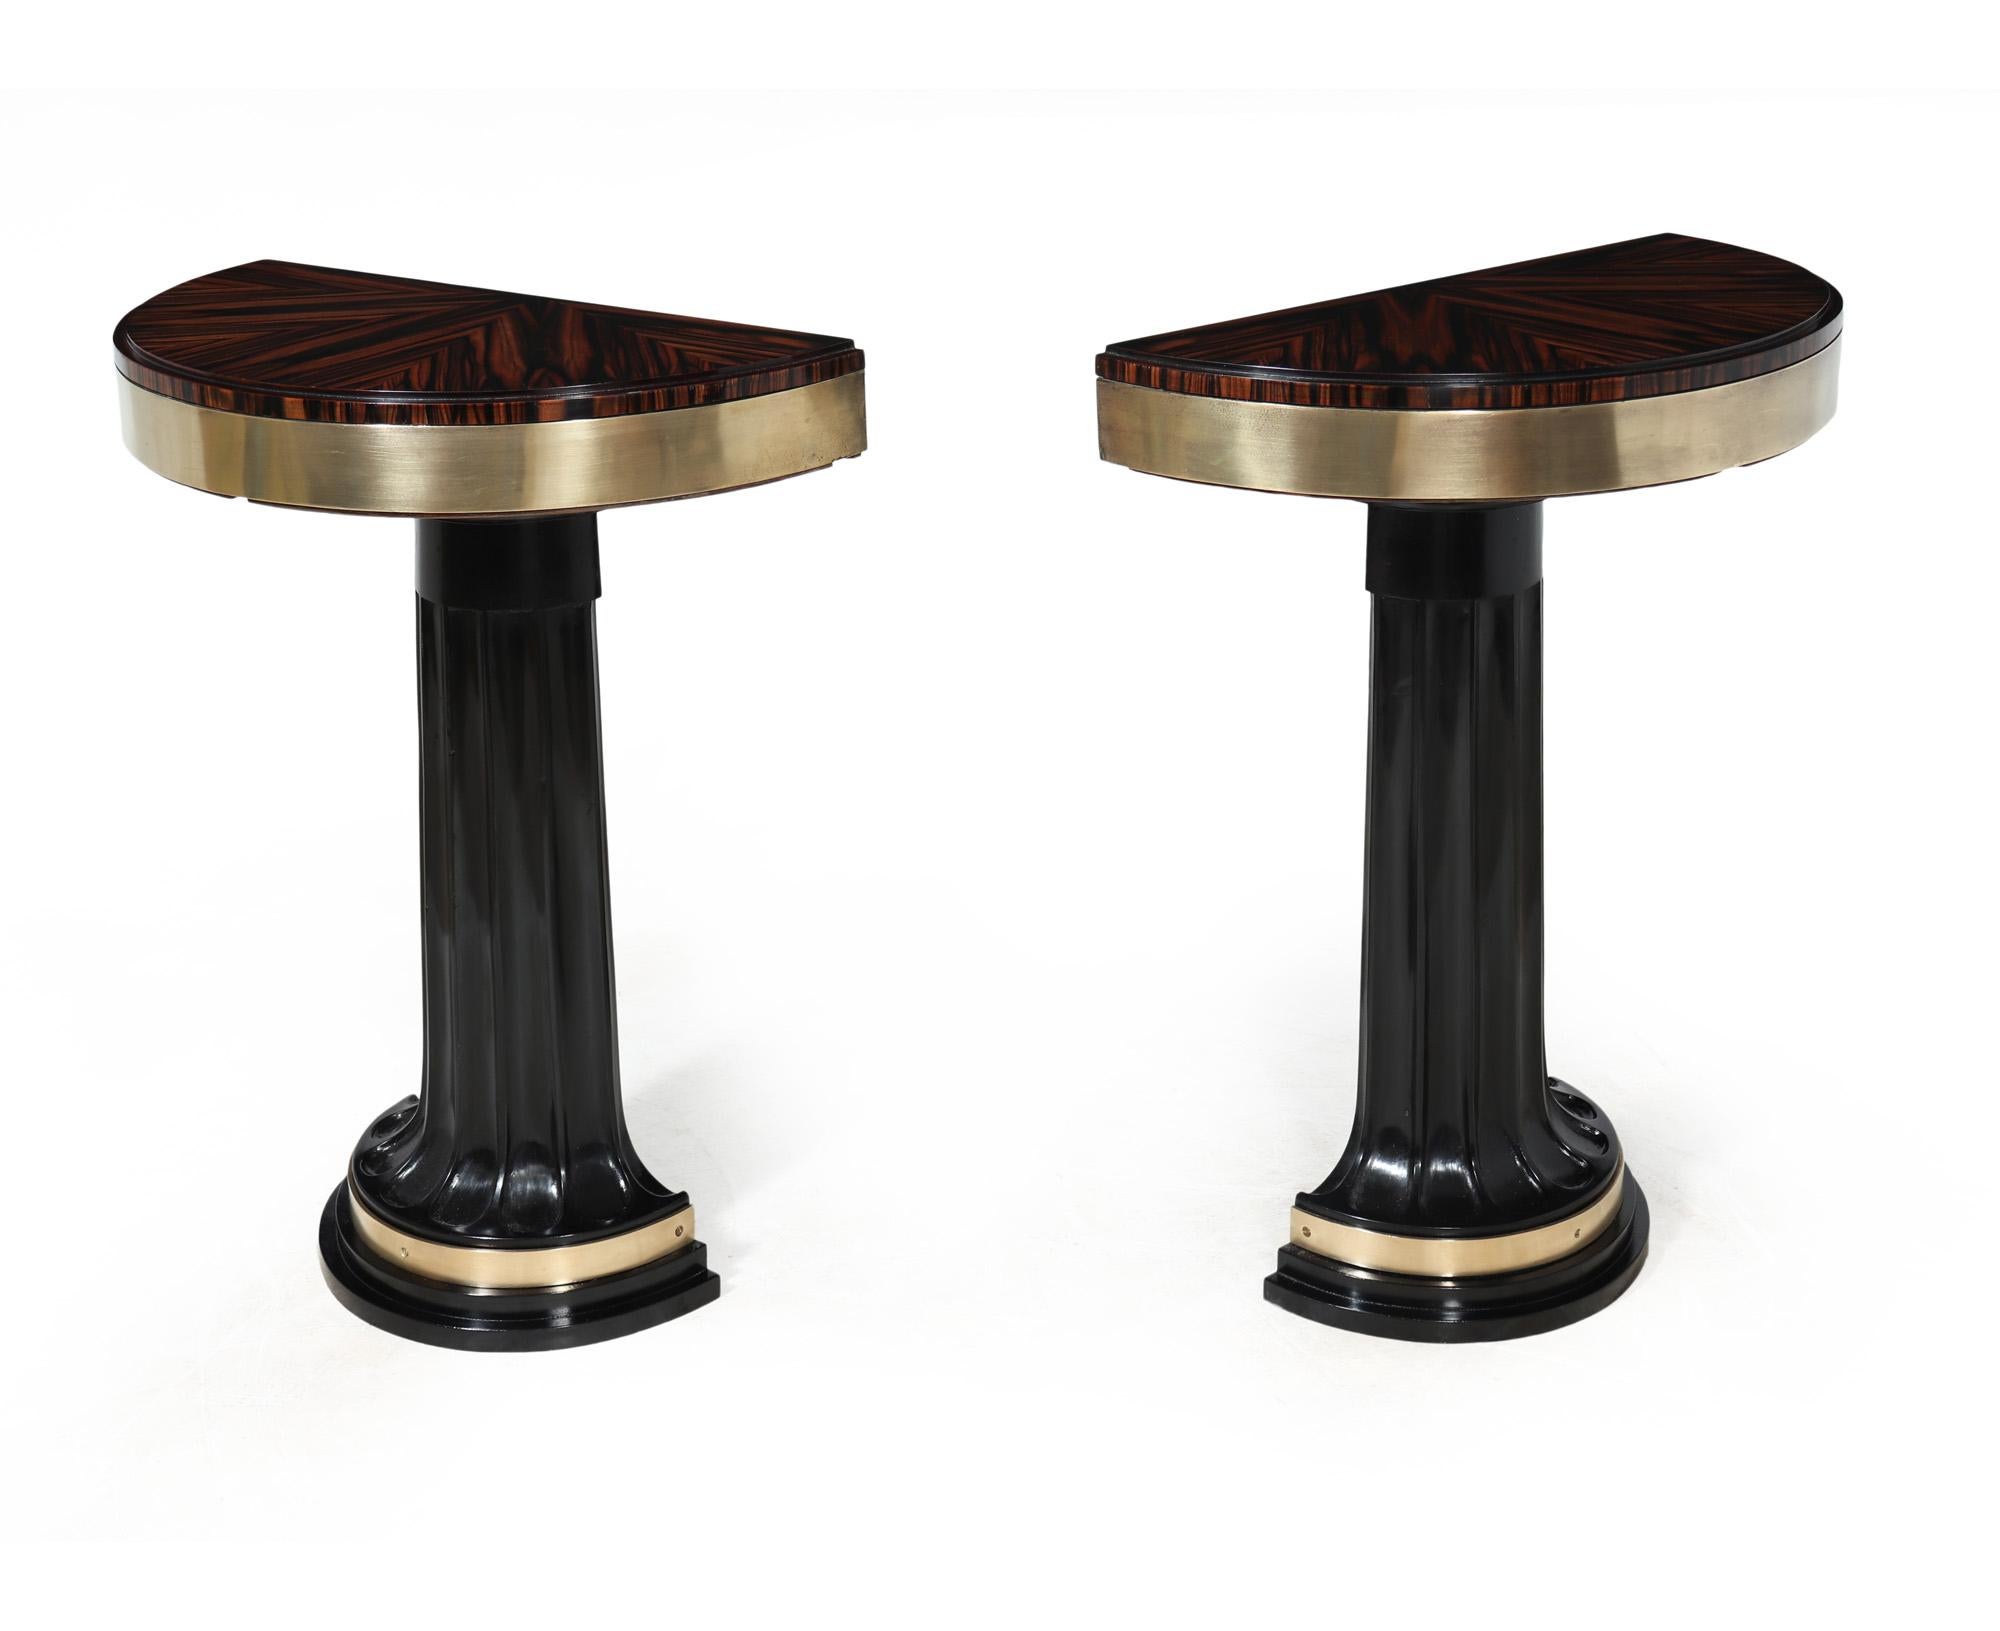 ITALIAN ART DECO CONSOLE TABLES
A stunning little pair of Italian Art Deco console tables with Macassar Ebony tops and have brass surround with a Demi lune ebonised and fluted upright that gently curves onto more brass work and steeped down base.